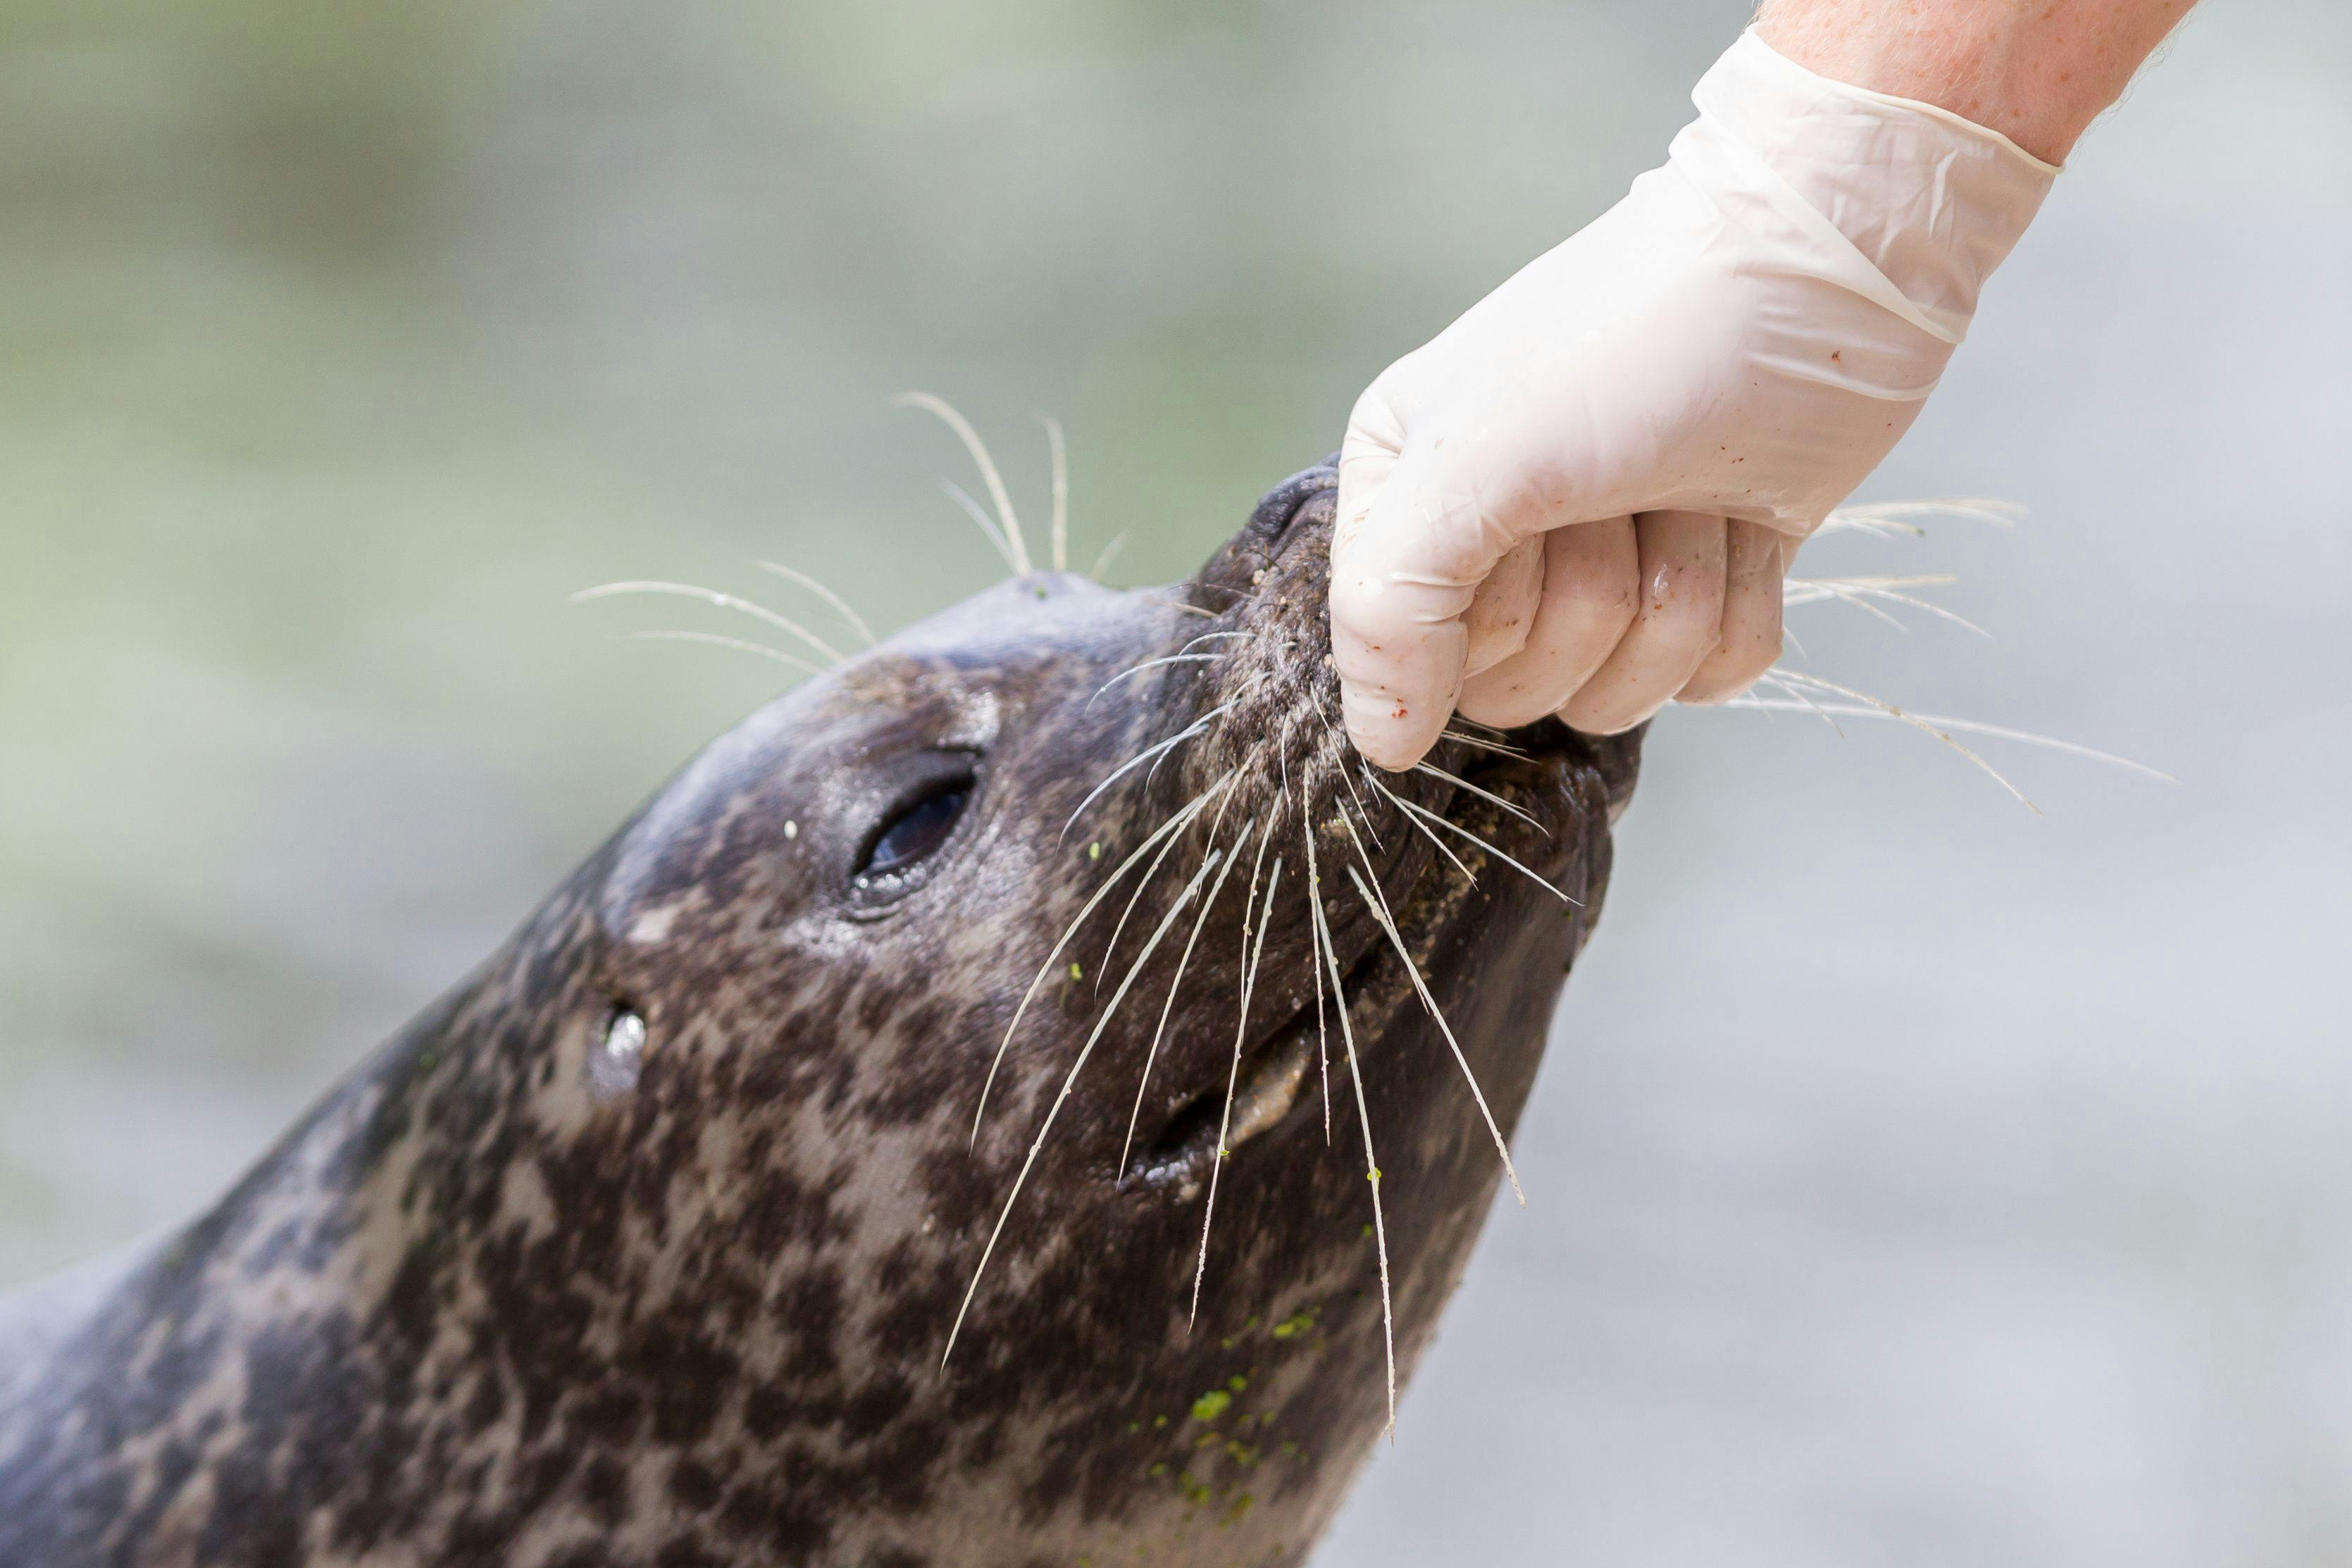 So, you want to be an aquatic animal veterinarian